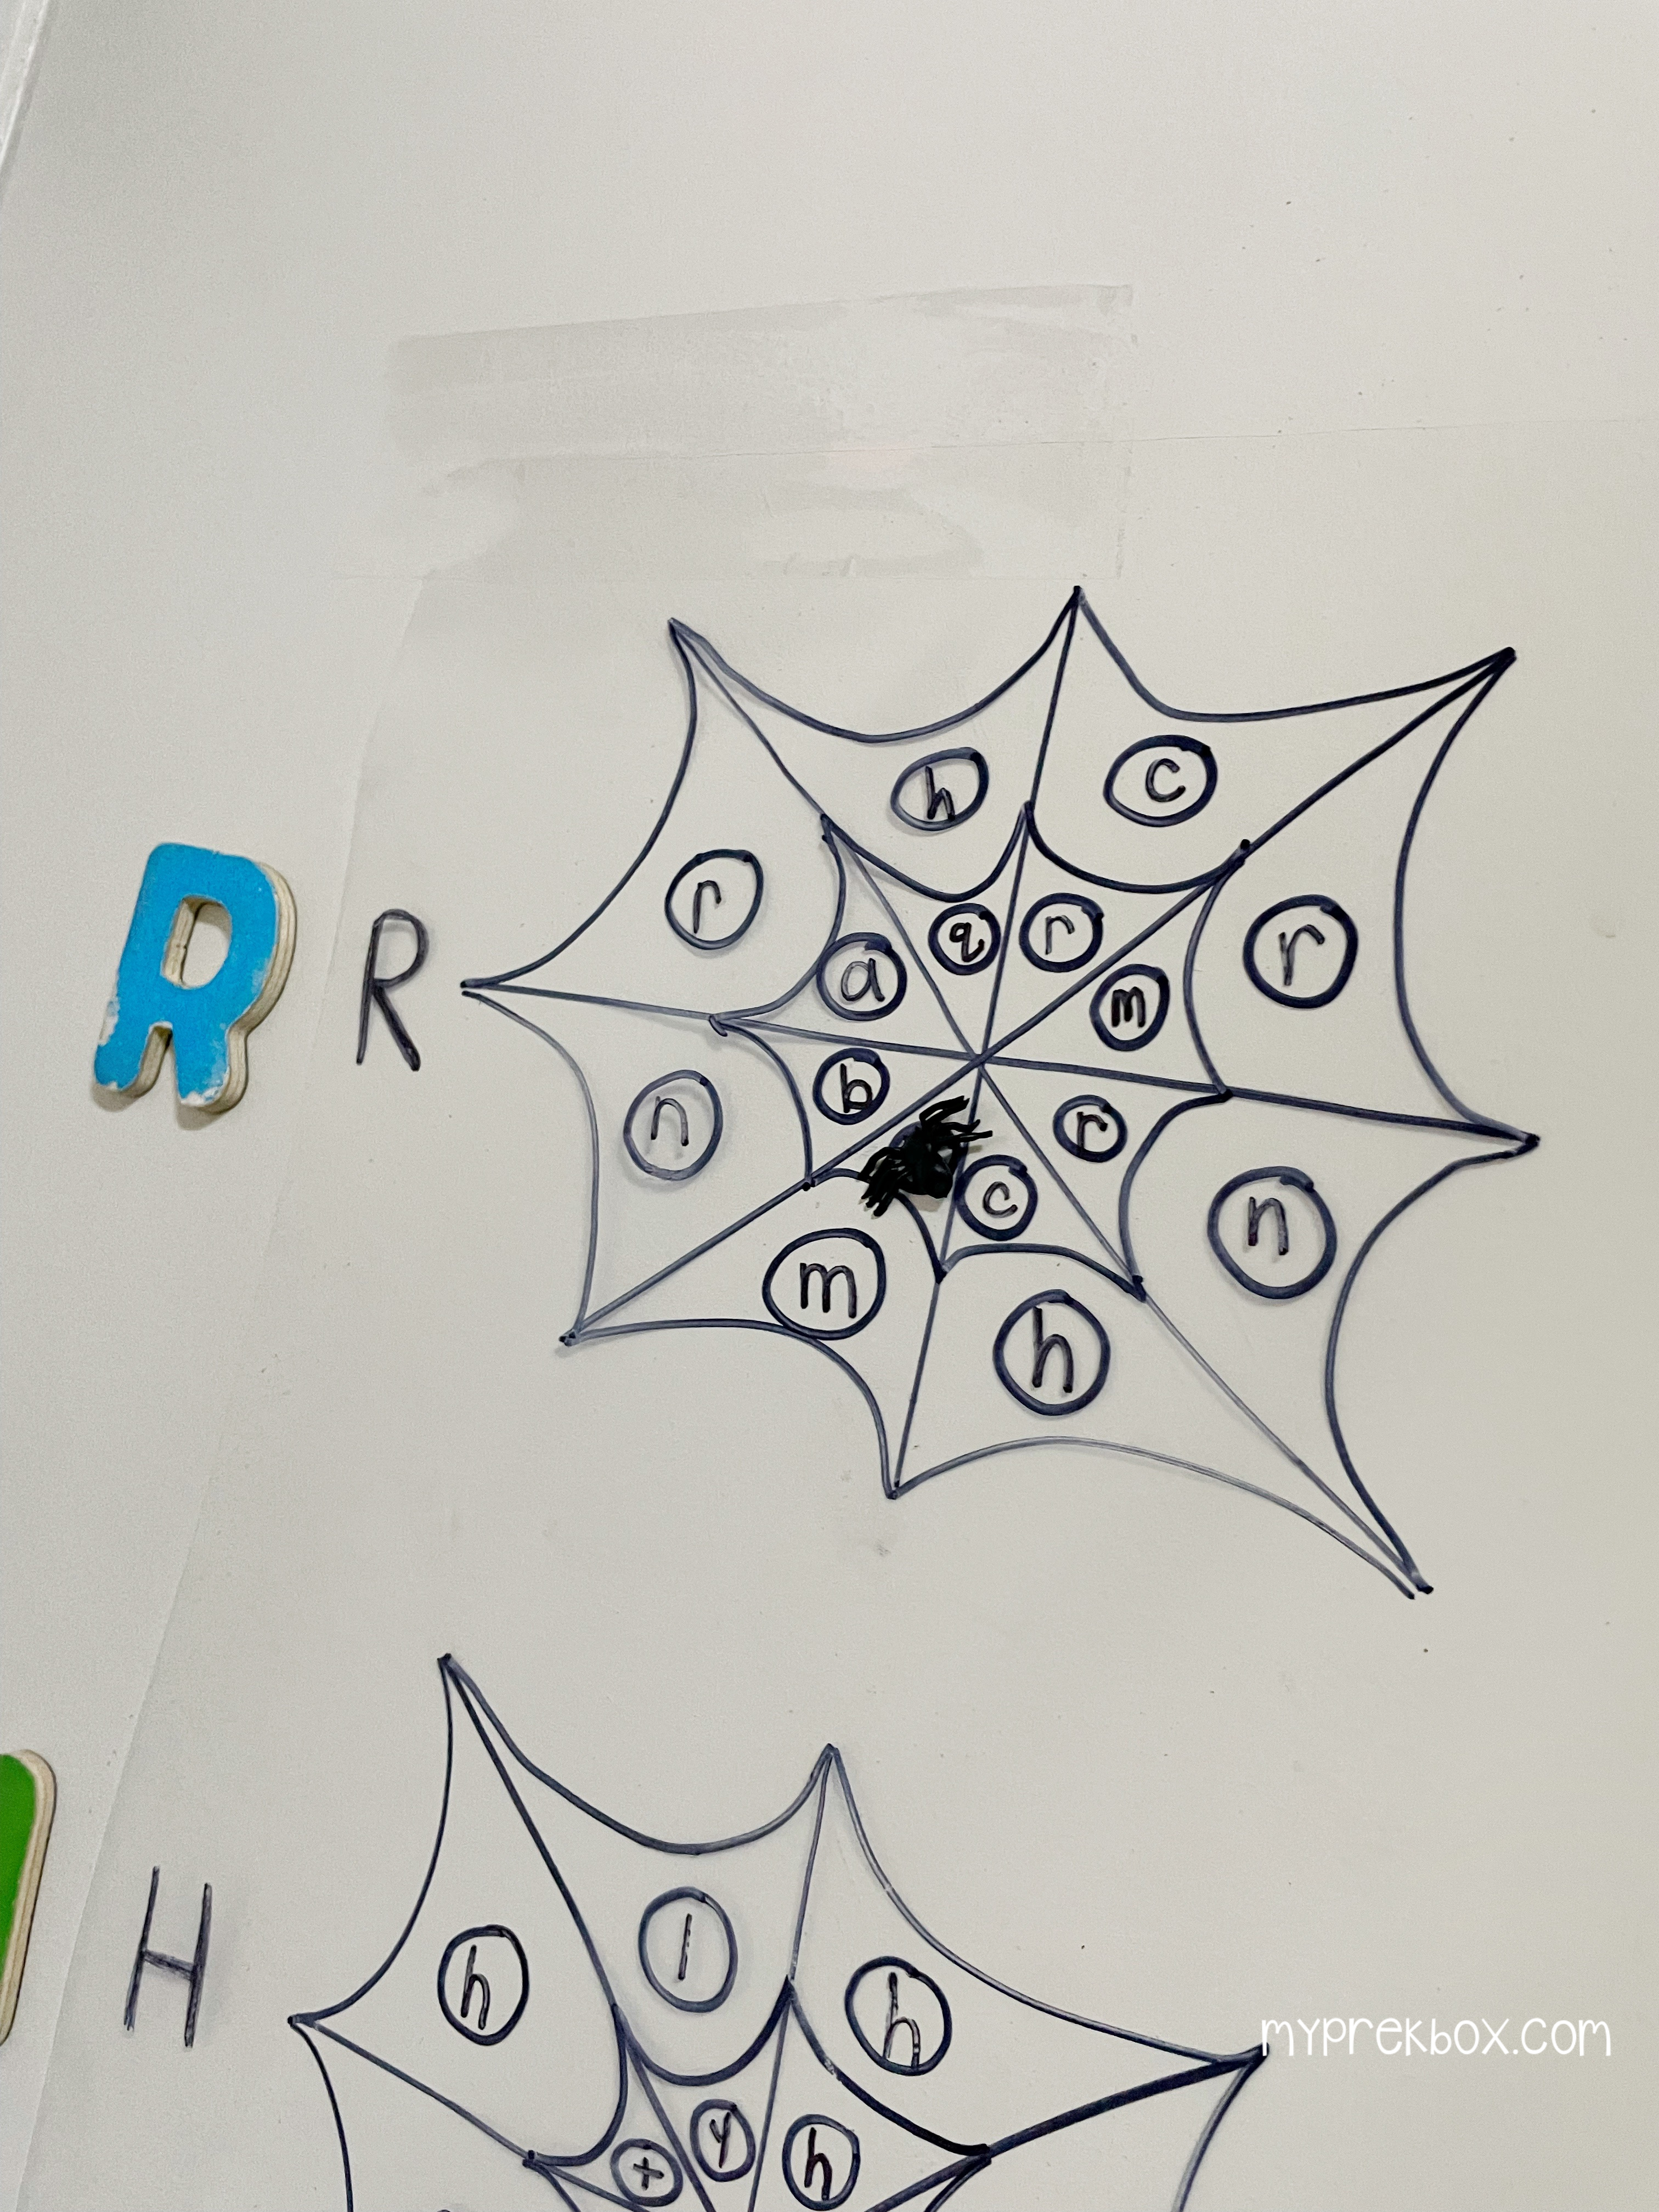 Preschool Halloween letter recognition Activity, letters and a spider web